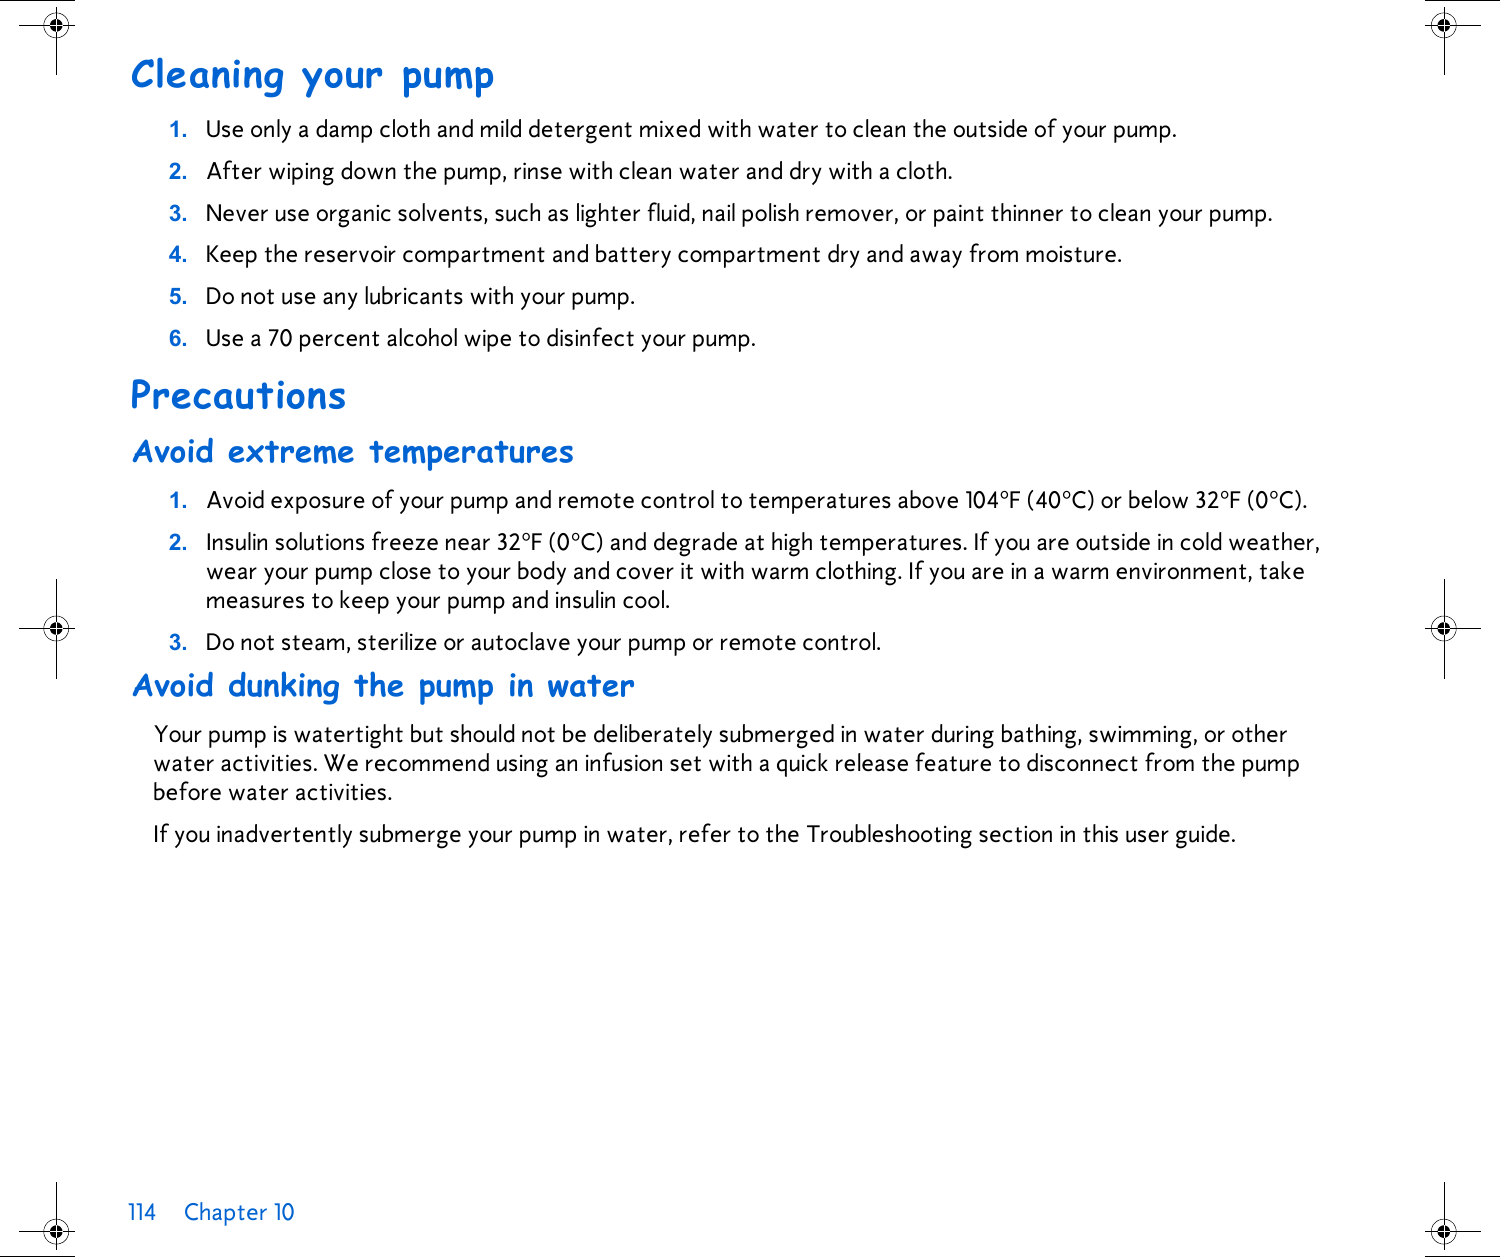 114 Chapter 10 Cleaning your pump1. Use only a damp cloth and mild detergent mixed with water to clean the outside of your pump. 2. After wiping down the pump, rinse with clean water and dry with a cloth. 3. Never use organic solvents, such as lighter fluid, nail polish remover, or paint thinner to clean your pump.4. Keep the reservoir compartment and battery compartment dry and away from moisture.5. Do not use any lubricants with your pump.6. Use a 70 percent alcohol wipe to disinfect your pump.PrecautionsAvoid extreme temperatures1. Avoid exposure of your pump and remote control to temperatures above 104°F (40°C) or below 32°F (0°C).2. Insulin solutions freeze near 32°F (0°C) and degrade at high temperatures. If you are outside in cold weather, wear your pump close to your body and cover it with warm clothing. If you are in a warm environment, take measures to keep your pump and insulin cool.3. Do not steam, sterilize or autoclave your pump or remote control.Avoid dunking the pump in waterYour pump is watertight but should not be deliberately submerged in water during bathing, swimming, or other water activities. We recommend using an infusion set with a quick release feature to disconnect from the pump before water activities. If you inadvertently submerge your pump in water, refer to the Troubleshooting section in this user guide.